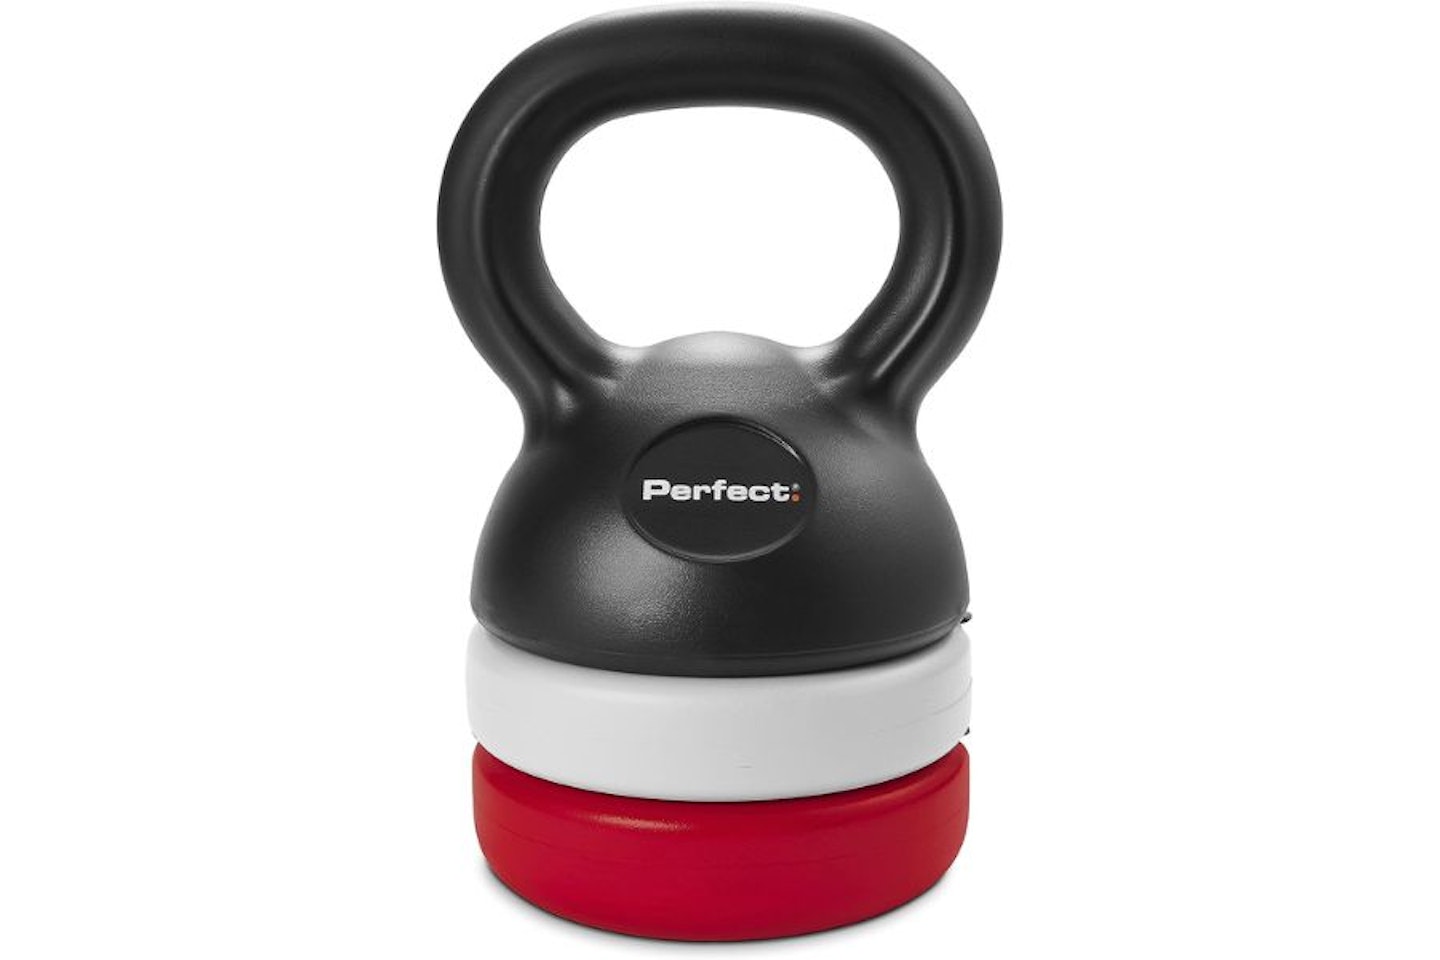 Perfect Fitness Adjustable Kettlebell Weights